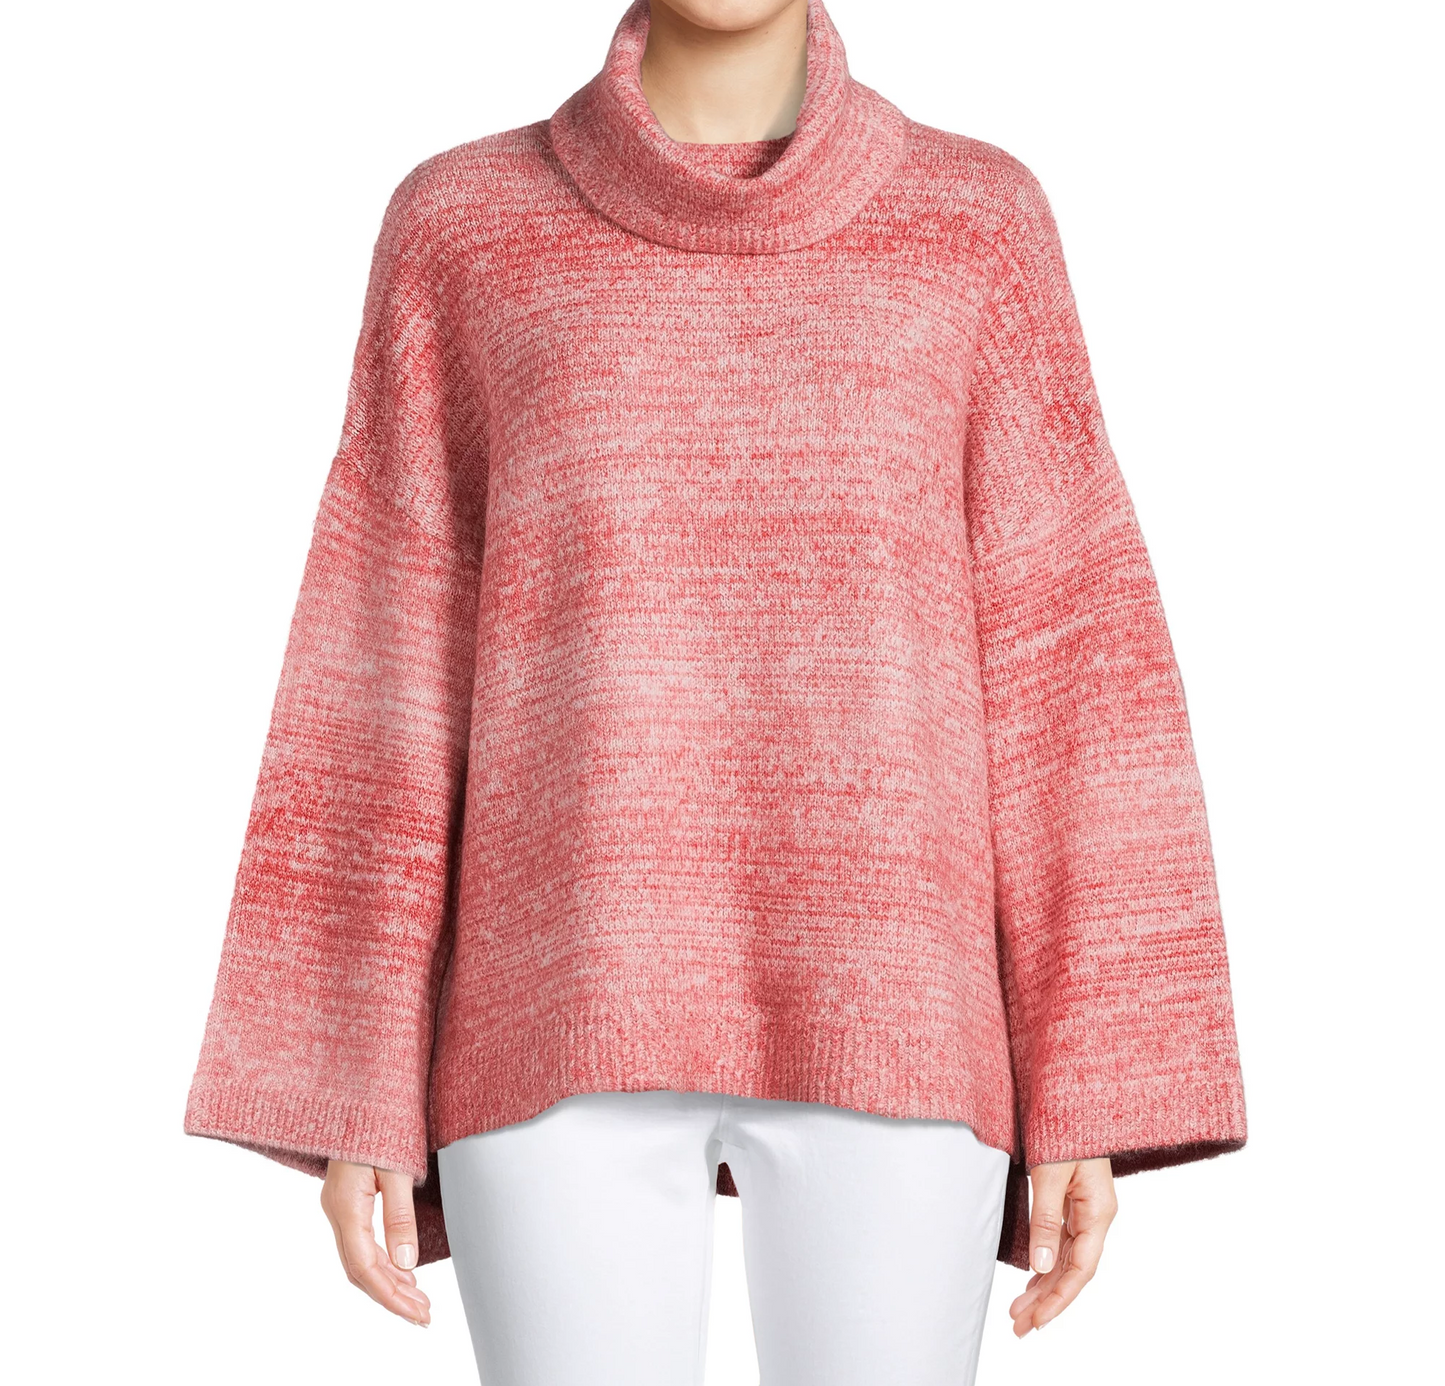 Women's Ombre Cowl Neck Pullover Midweight Sweater